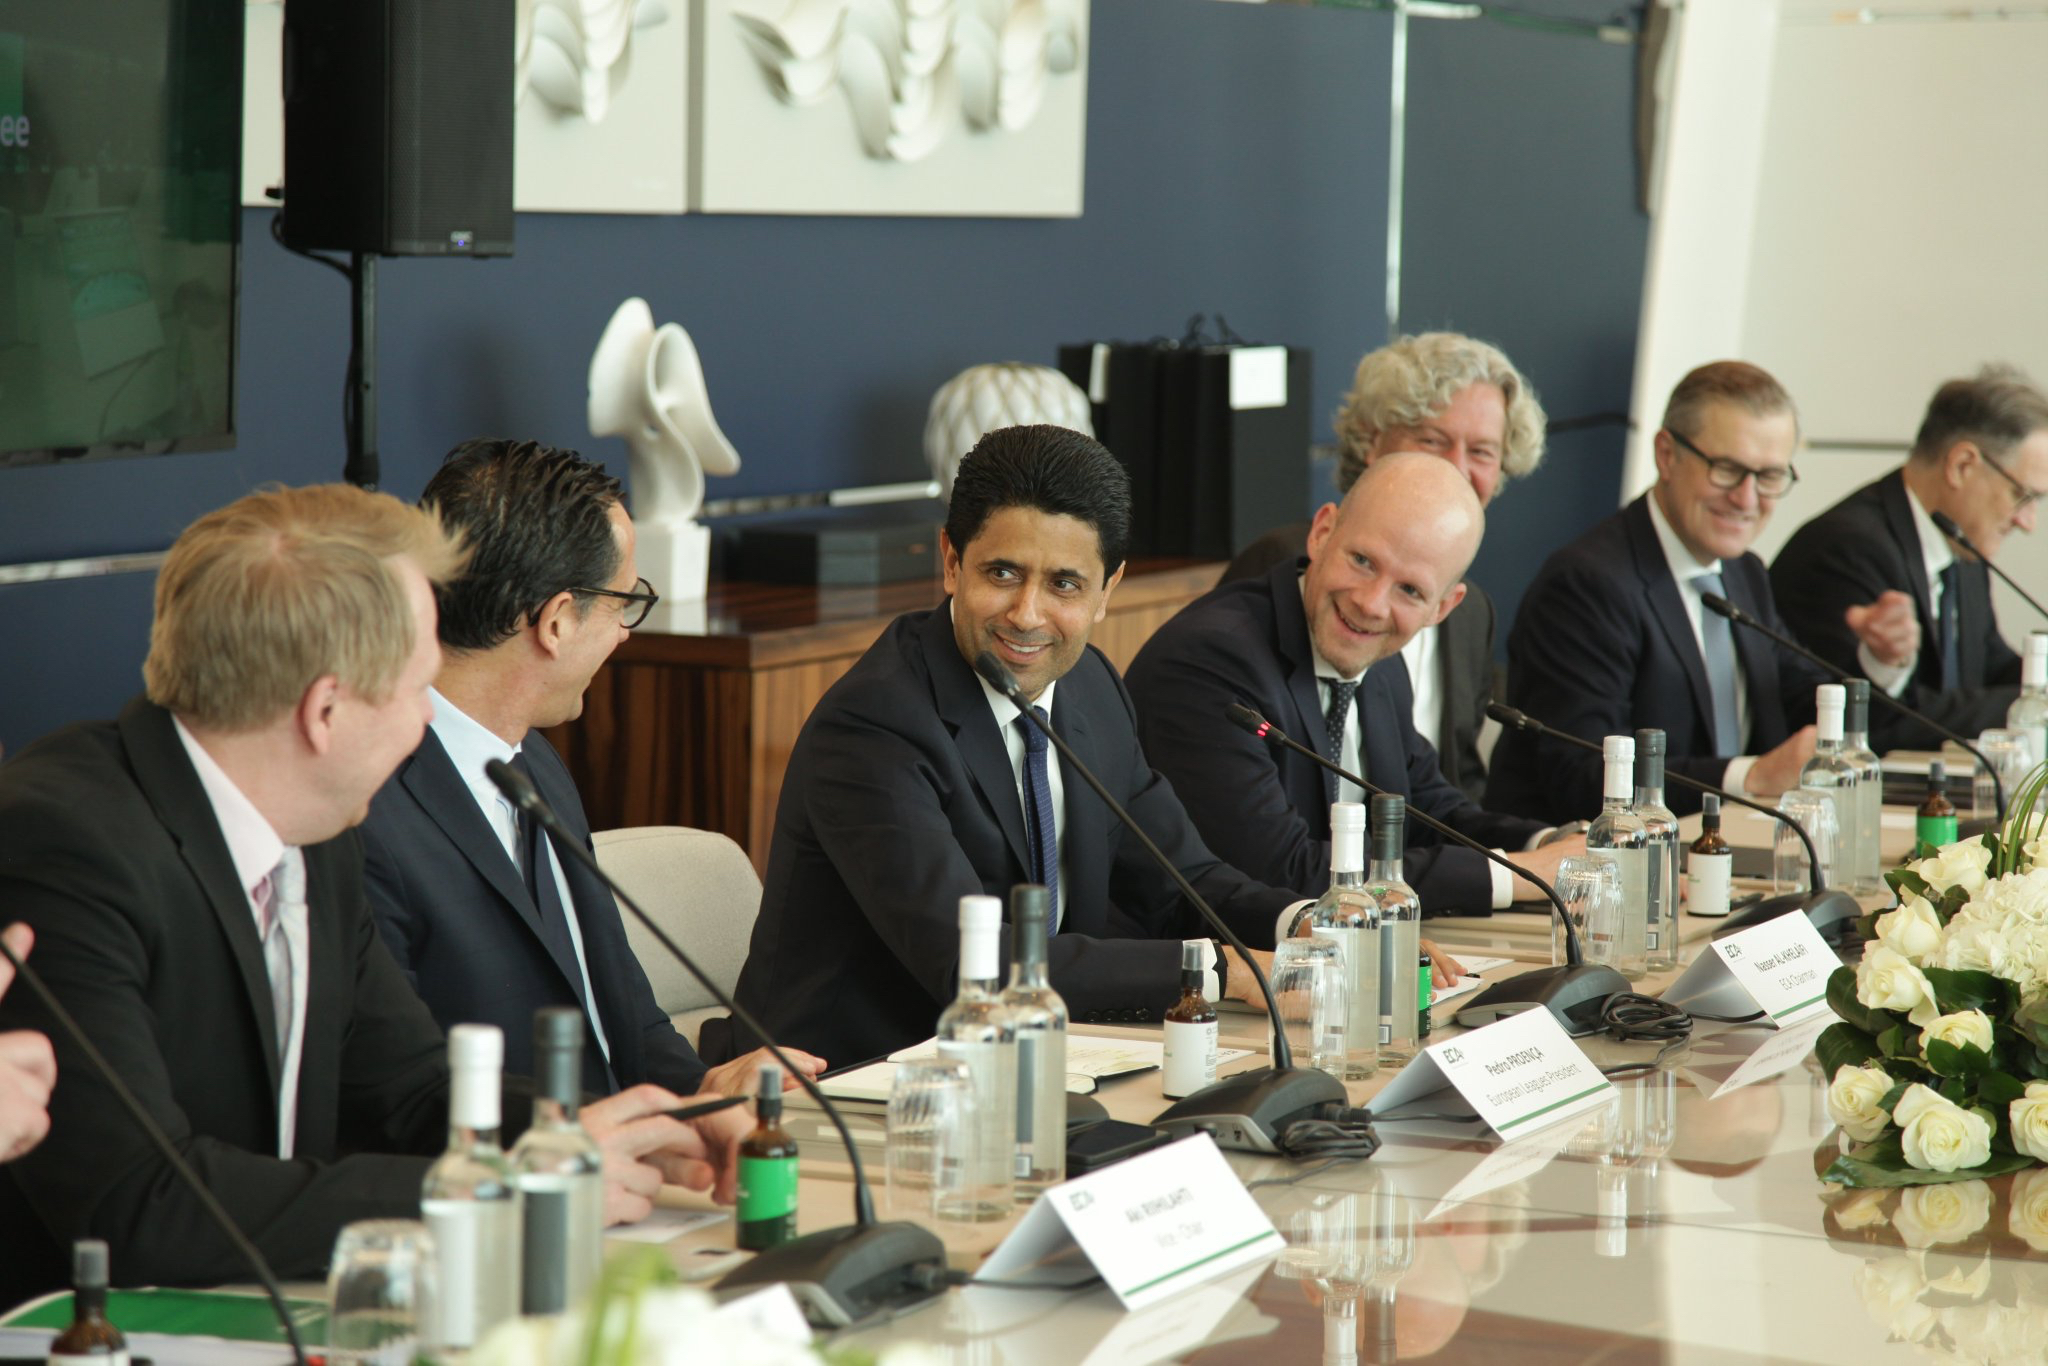 ECA Executive Committee members ‘impressed’ by Qatar’s skills in hosting sporting events